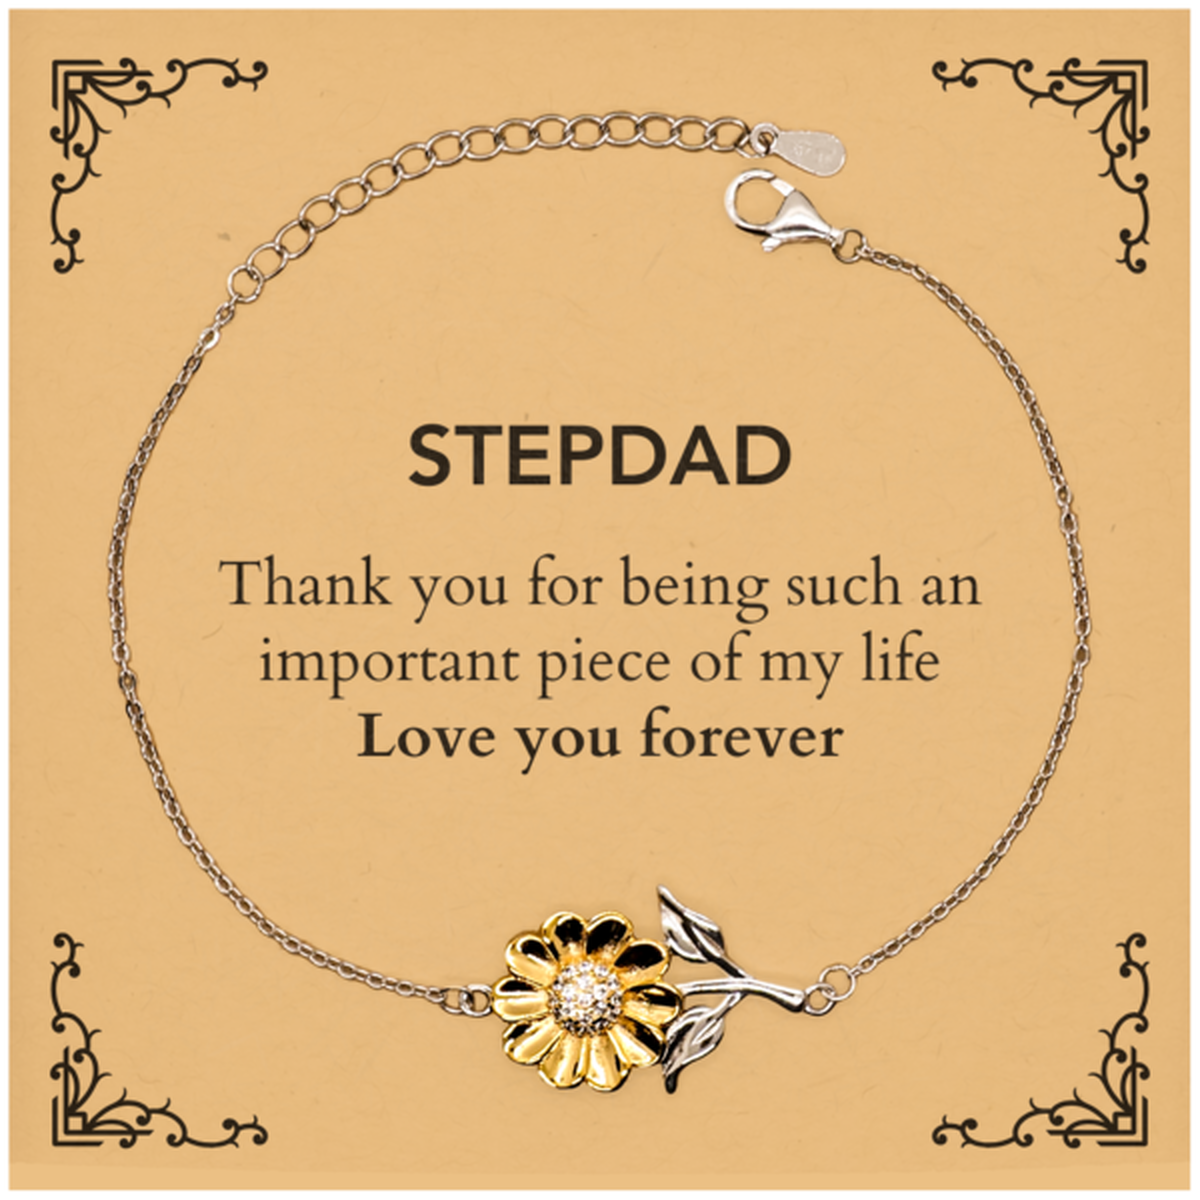 Appropriate Stepdad Sunflower Bracelet Epic Birthday Gifts for Stepdad Thank you for being such an important piece of my life Stepdad Christmas Mothers Fathers Day